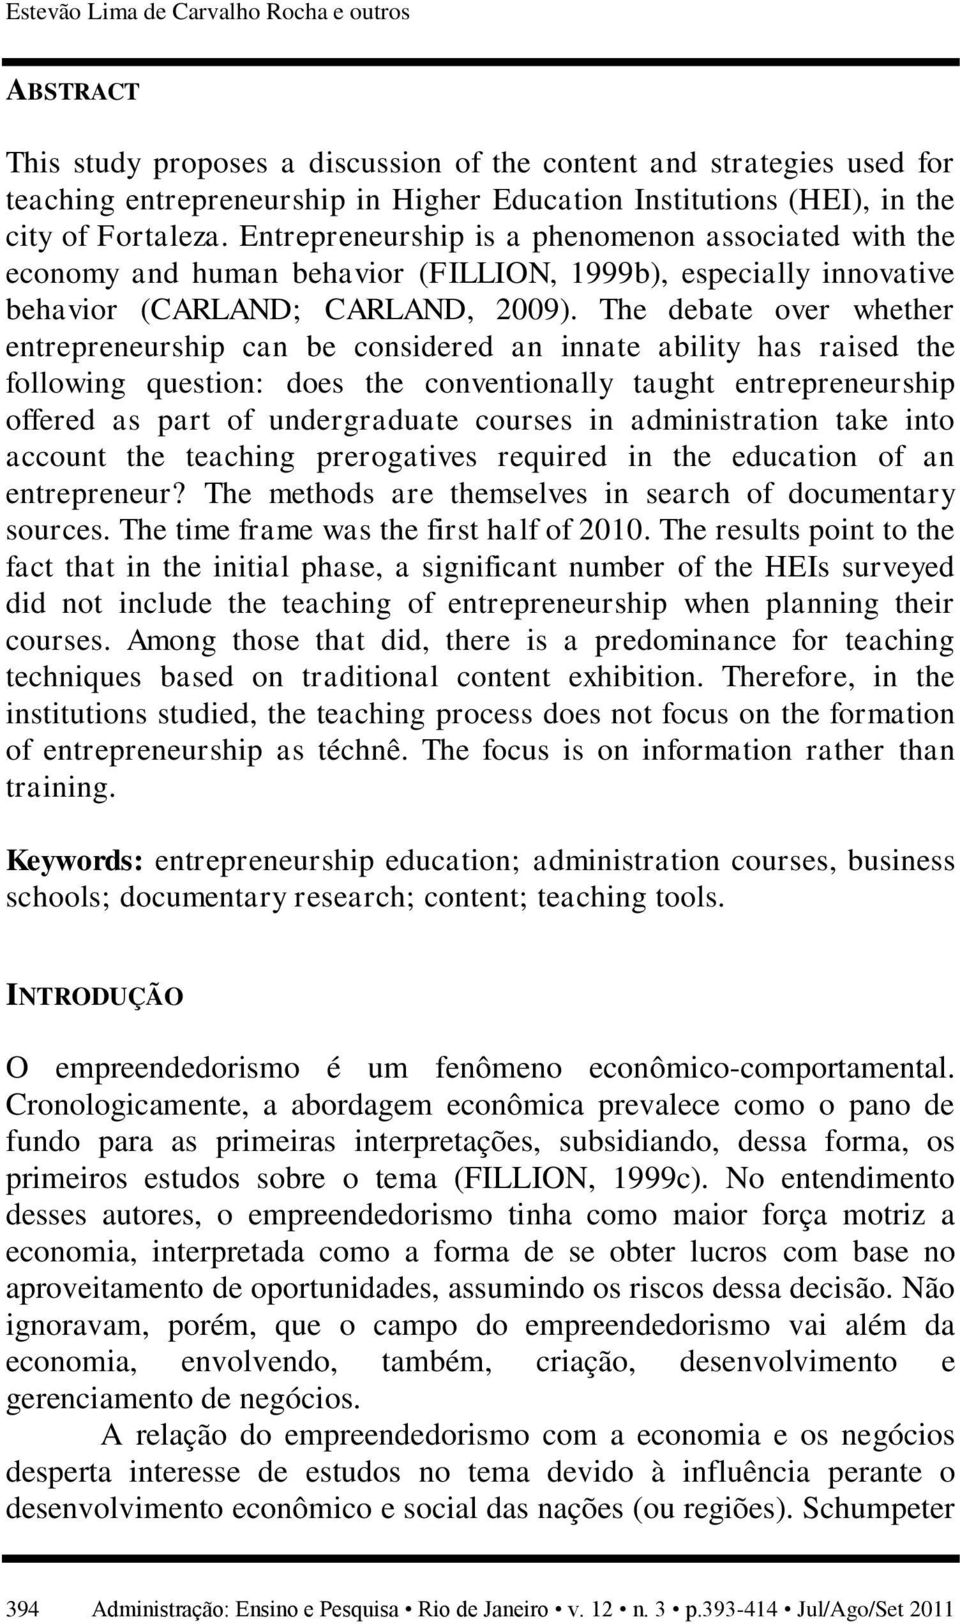 The debate over whether entrepreneurship can be considered an innate ability has raised the following question: does the conventionally taught entrepreneurship offered as part of undergraduate